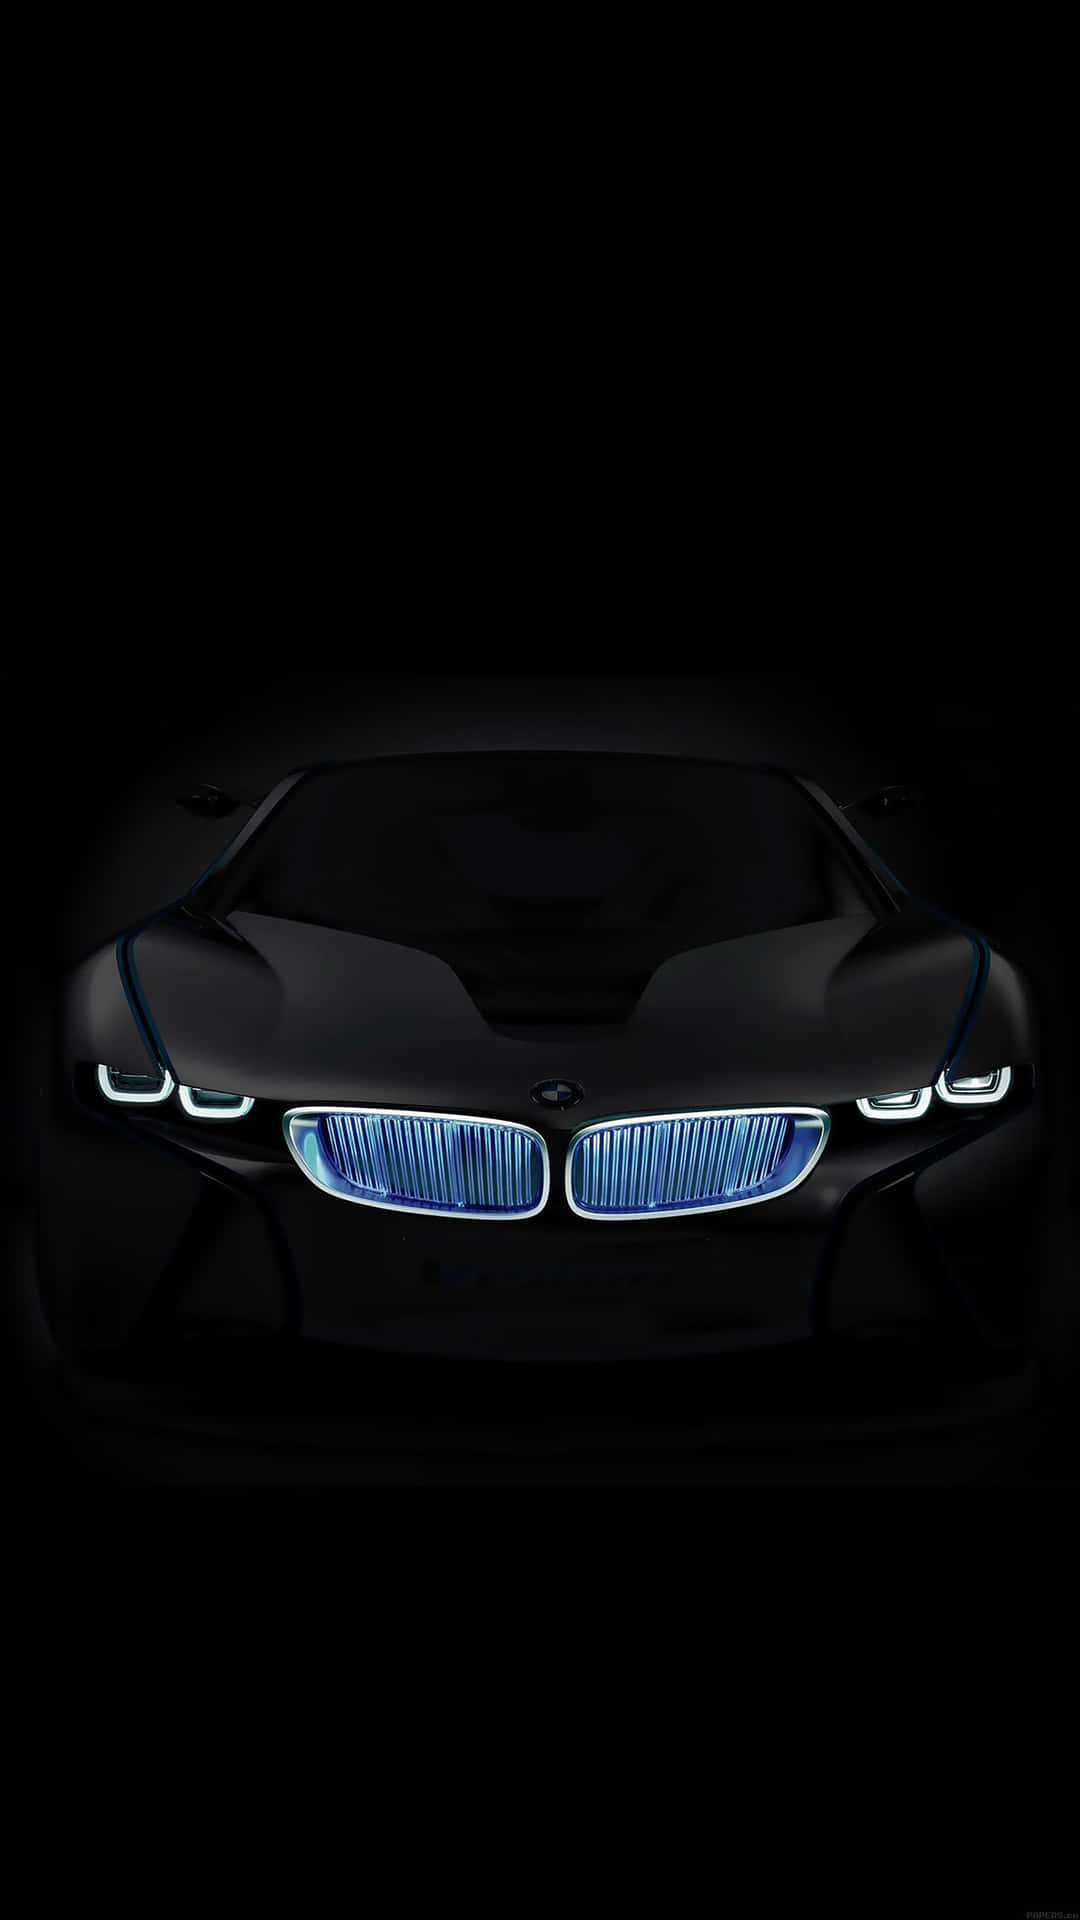 Get the Most Out of Your Road Trips with BMW iPhone Wallpaper